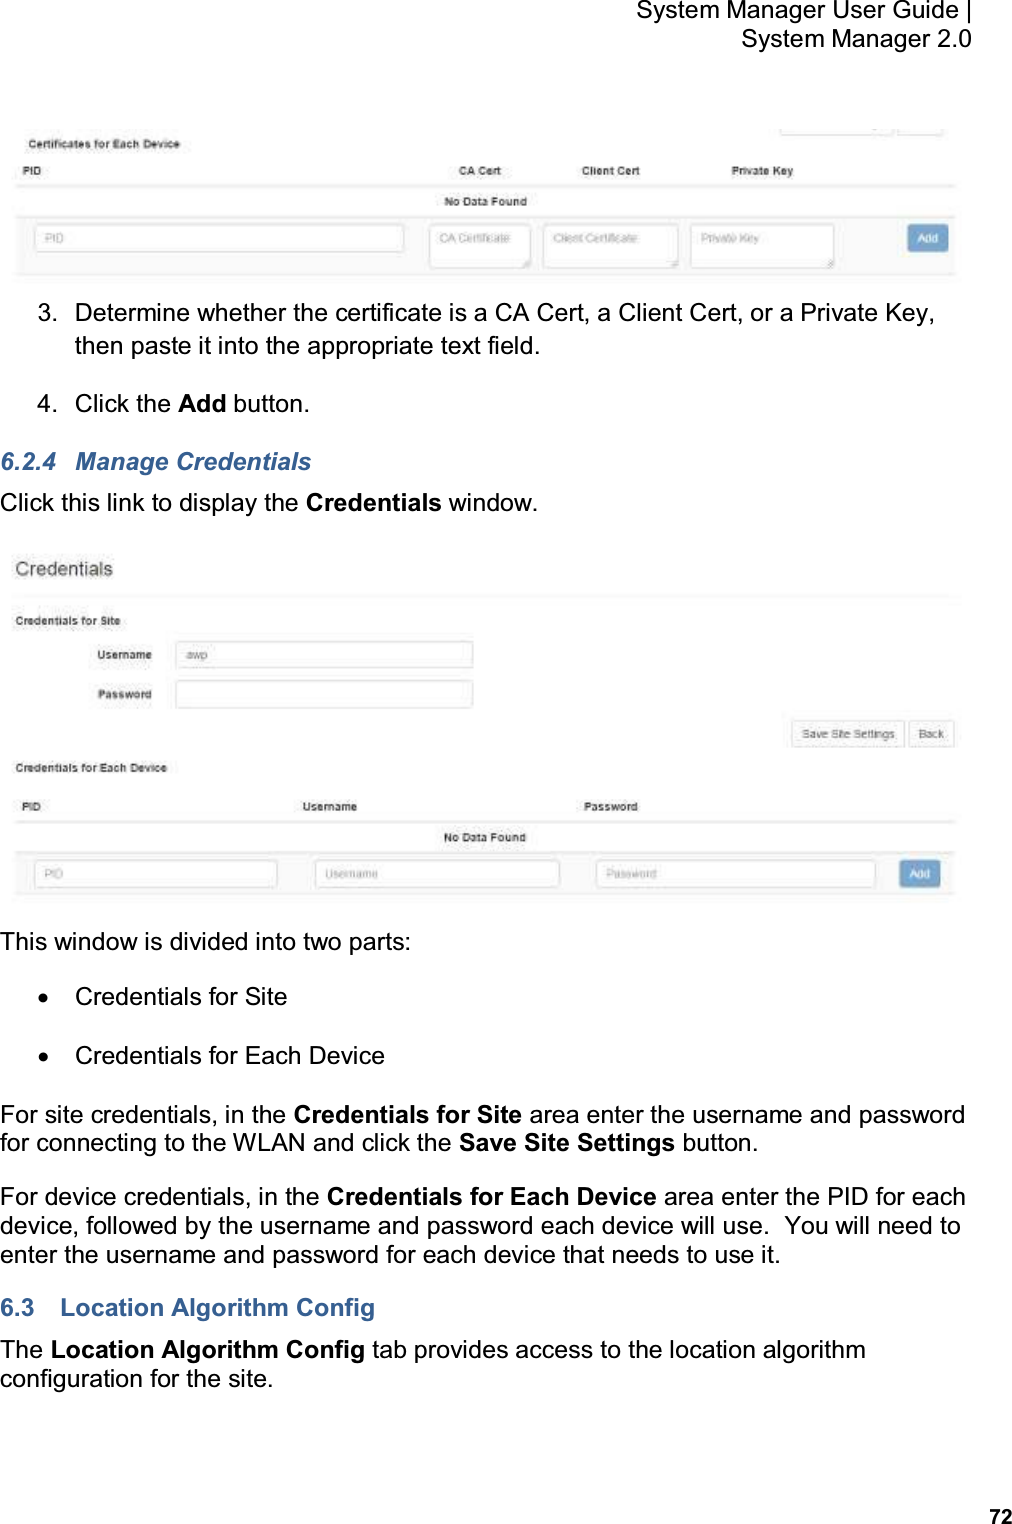           72 System Manager User Guide |  System Manager 2.0  3.  Determine whether the certificate is a CA Cert, a Client Cert, or a Private Key, then paste it into the appropriate text field. 4.  Click the Add button. 6.2.4  Manage Credentials Click this link to display the Credentials window.  This window is divided into two parts: •  Credentials for Site •  Credentials for Each Device For site credentials, in the Credentials for Site area enter the username and password for connecting to the WLAN and click the Save Site Settings button. For device credentials, in the Credentials for Each Device area enter the PID for each device, followed by the username and password each device will use.  You will need to enter the username and password for each device that needs to use it. 6.3  Location Algorithm Config The Location Algorithm Config tab provides access to the location algorithm configuration for the site. 